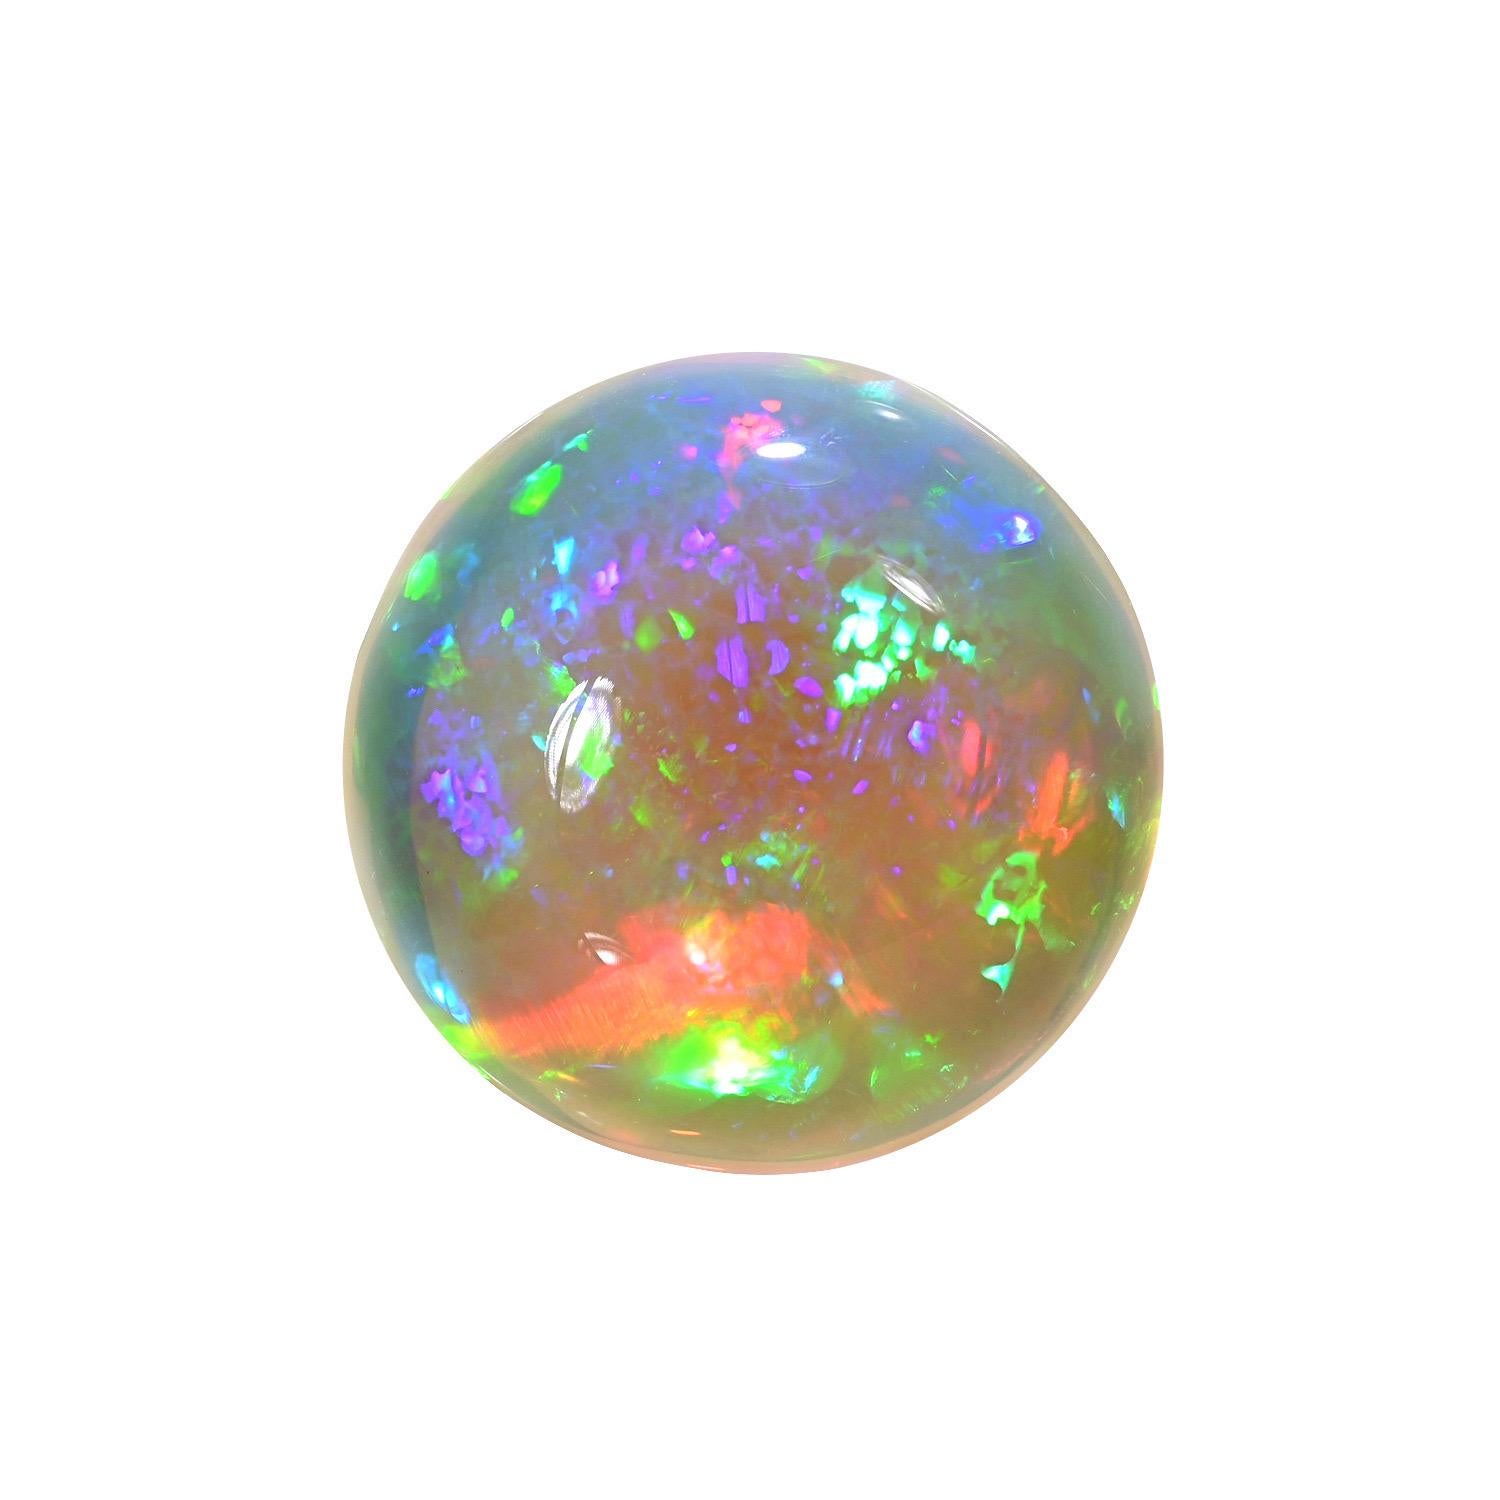 Natural 29.98 carat round Ethiopian Opal loose gemstone, offered unmounted to a fine gem connoisseur.
Returns are accepted and paid by us within 7 days of delivery.
We offer supreme custom jewelry work upon request. Please contact us for more